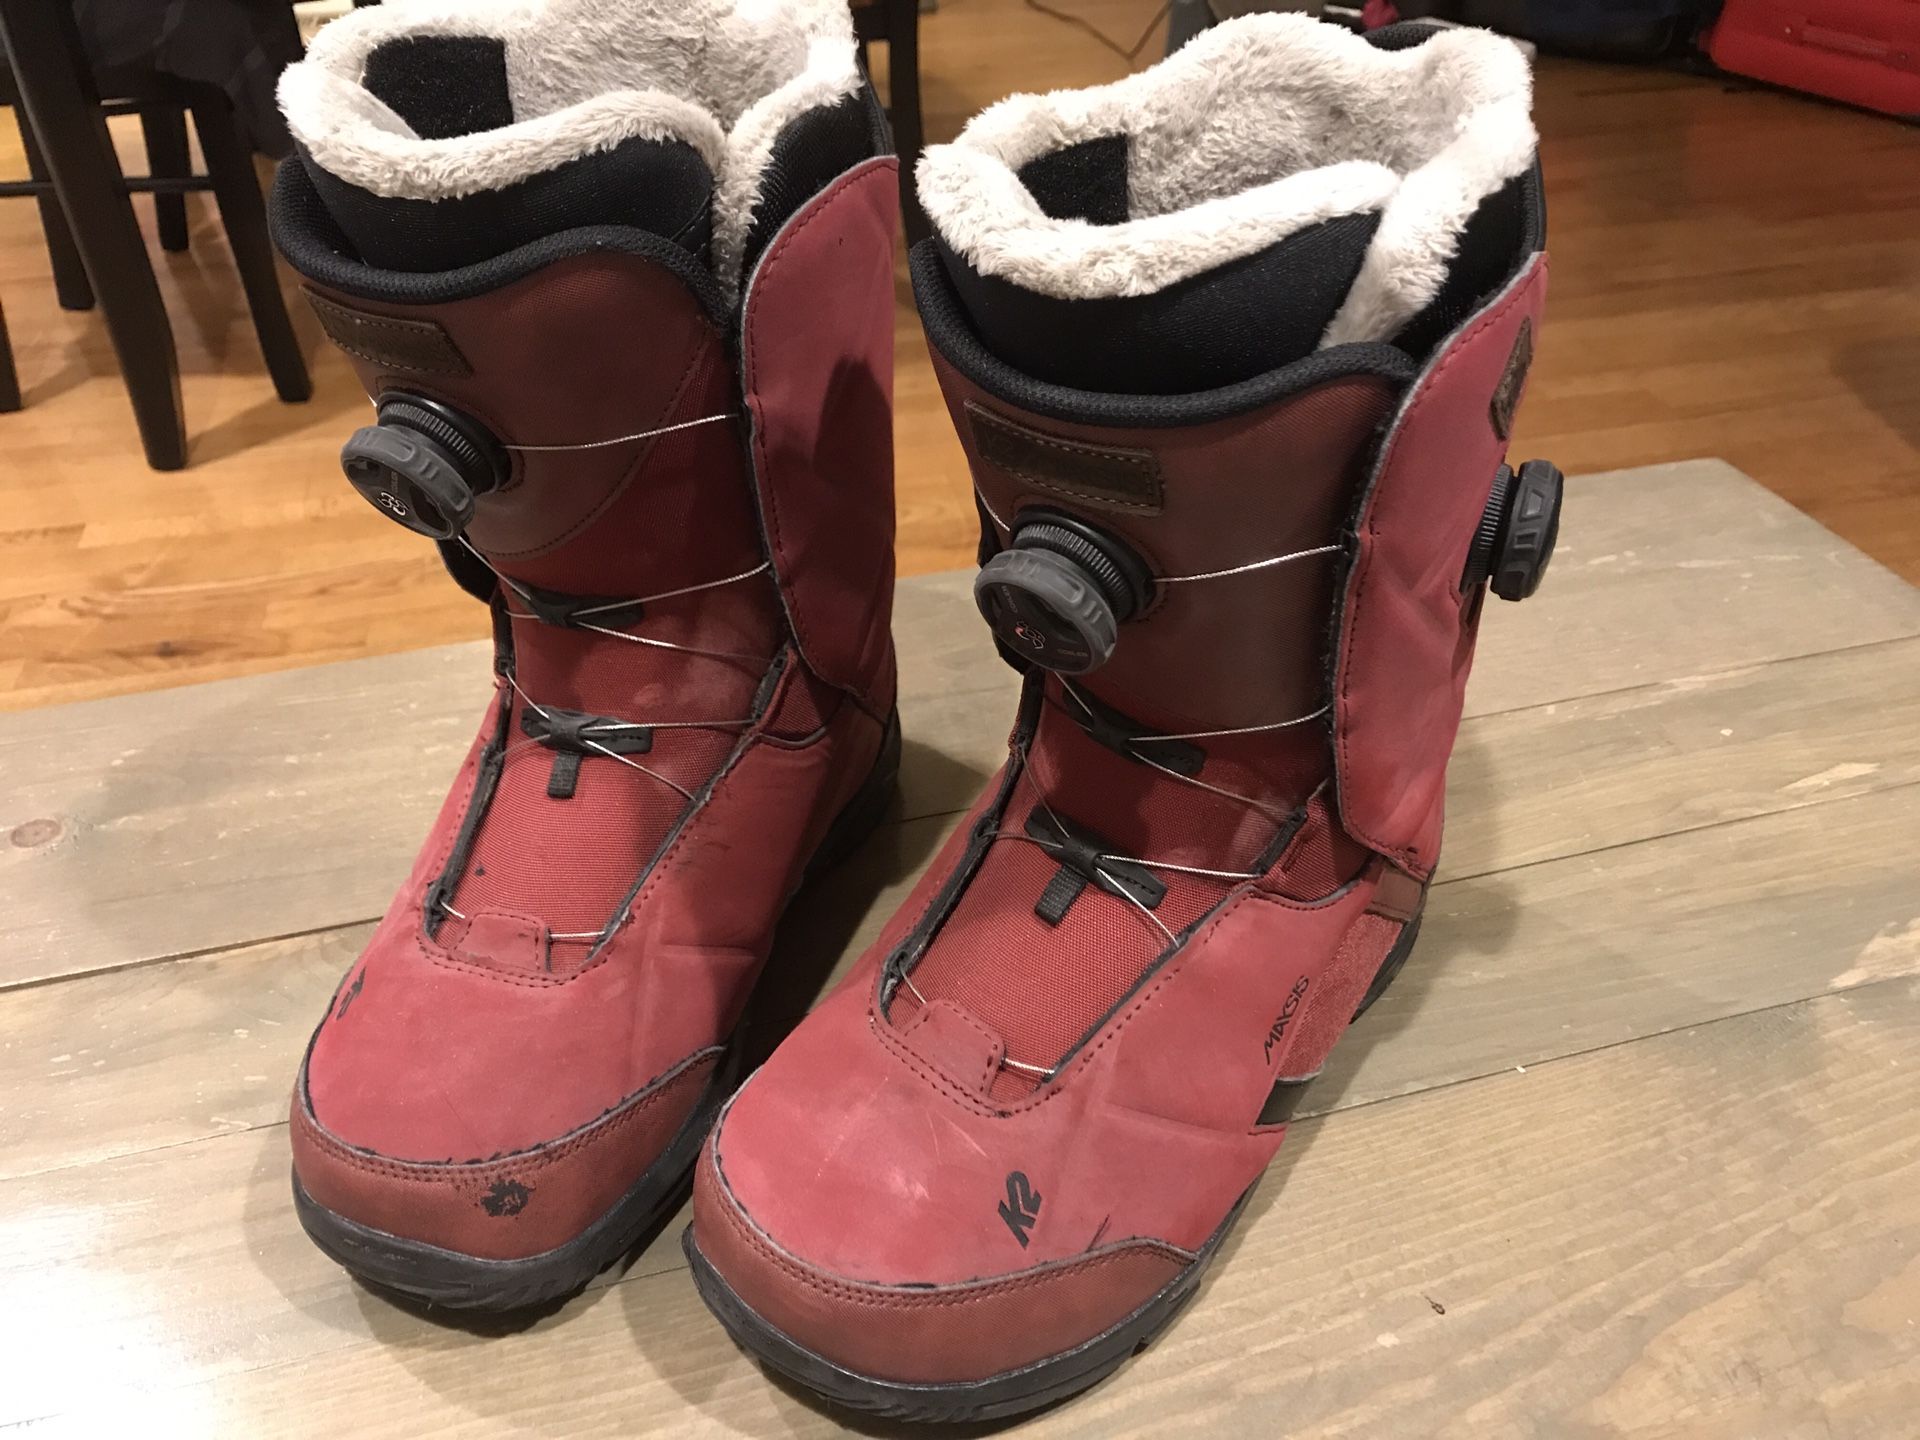 -K2 Snowboard Boots Double Boa System Size 10 Excellent Condition!